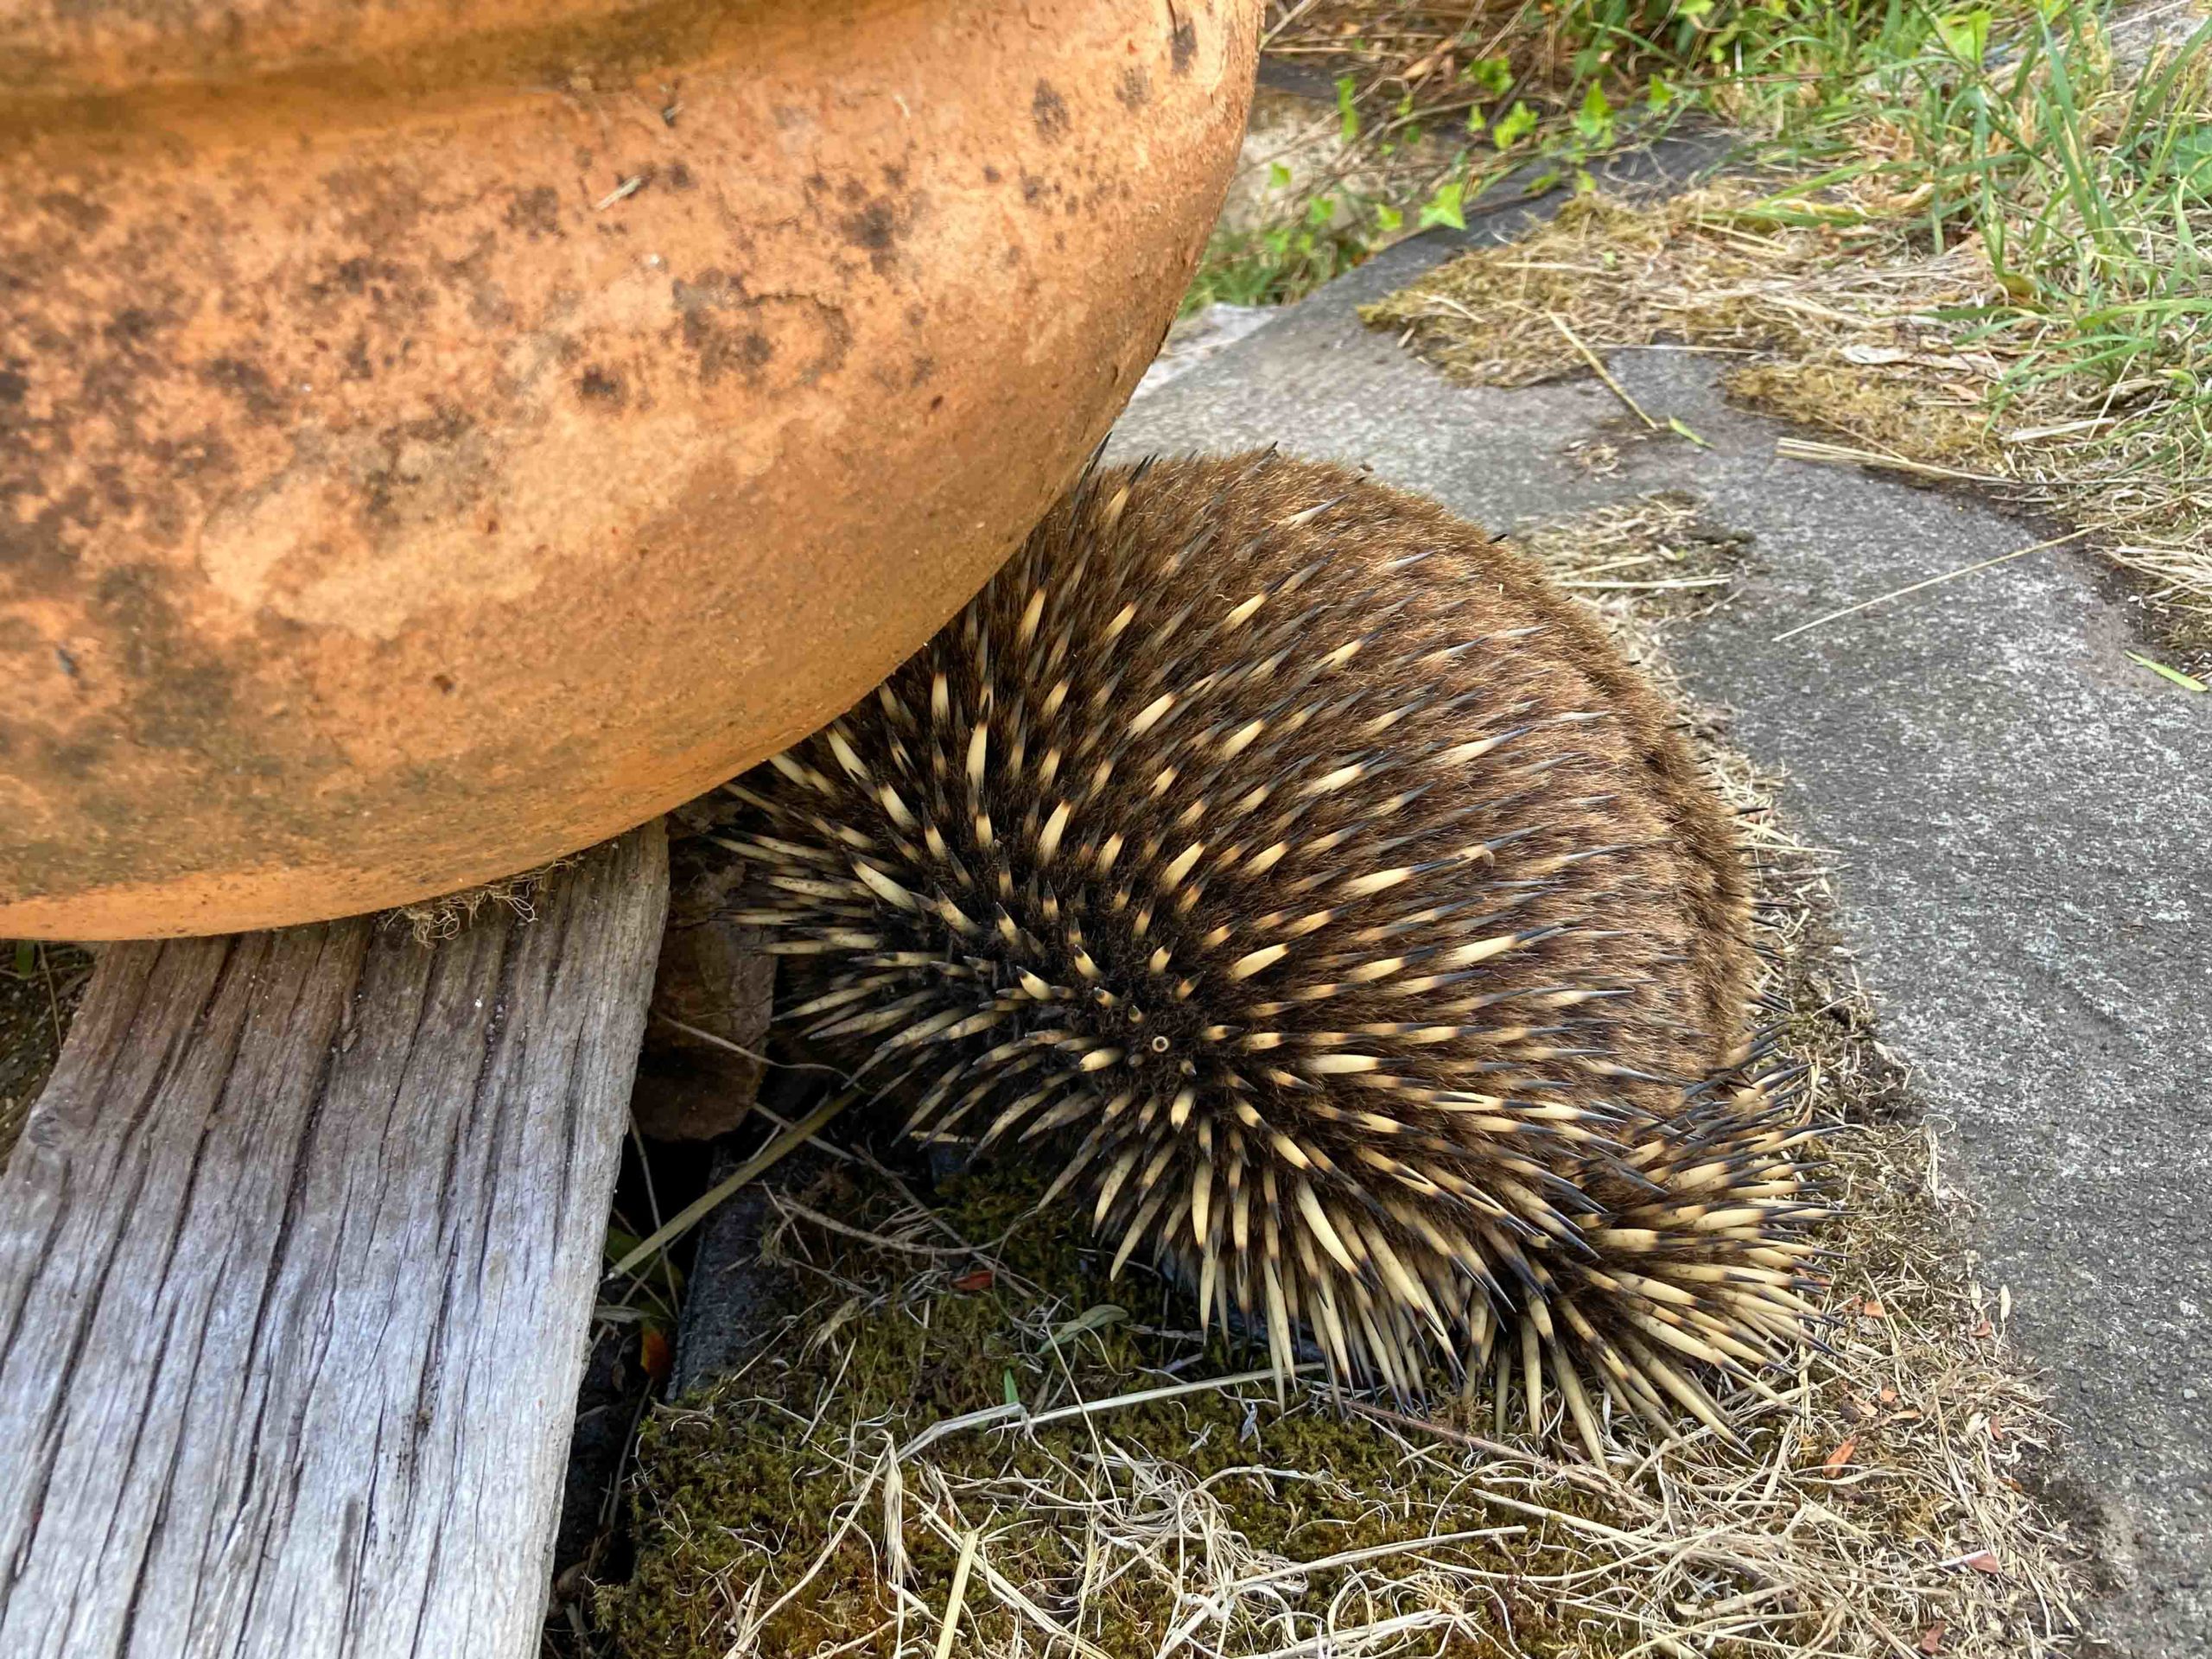 The back end of an echidna hiding under a large terracotta pot